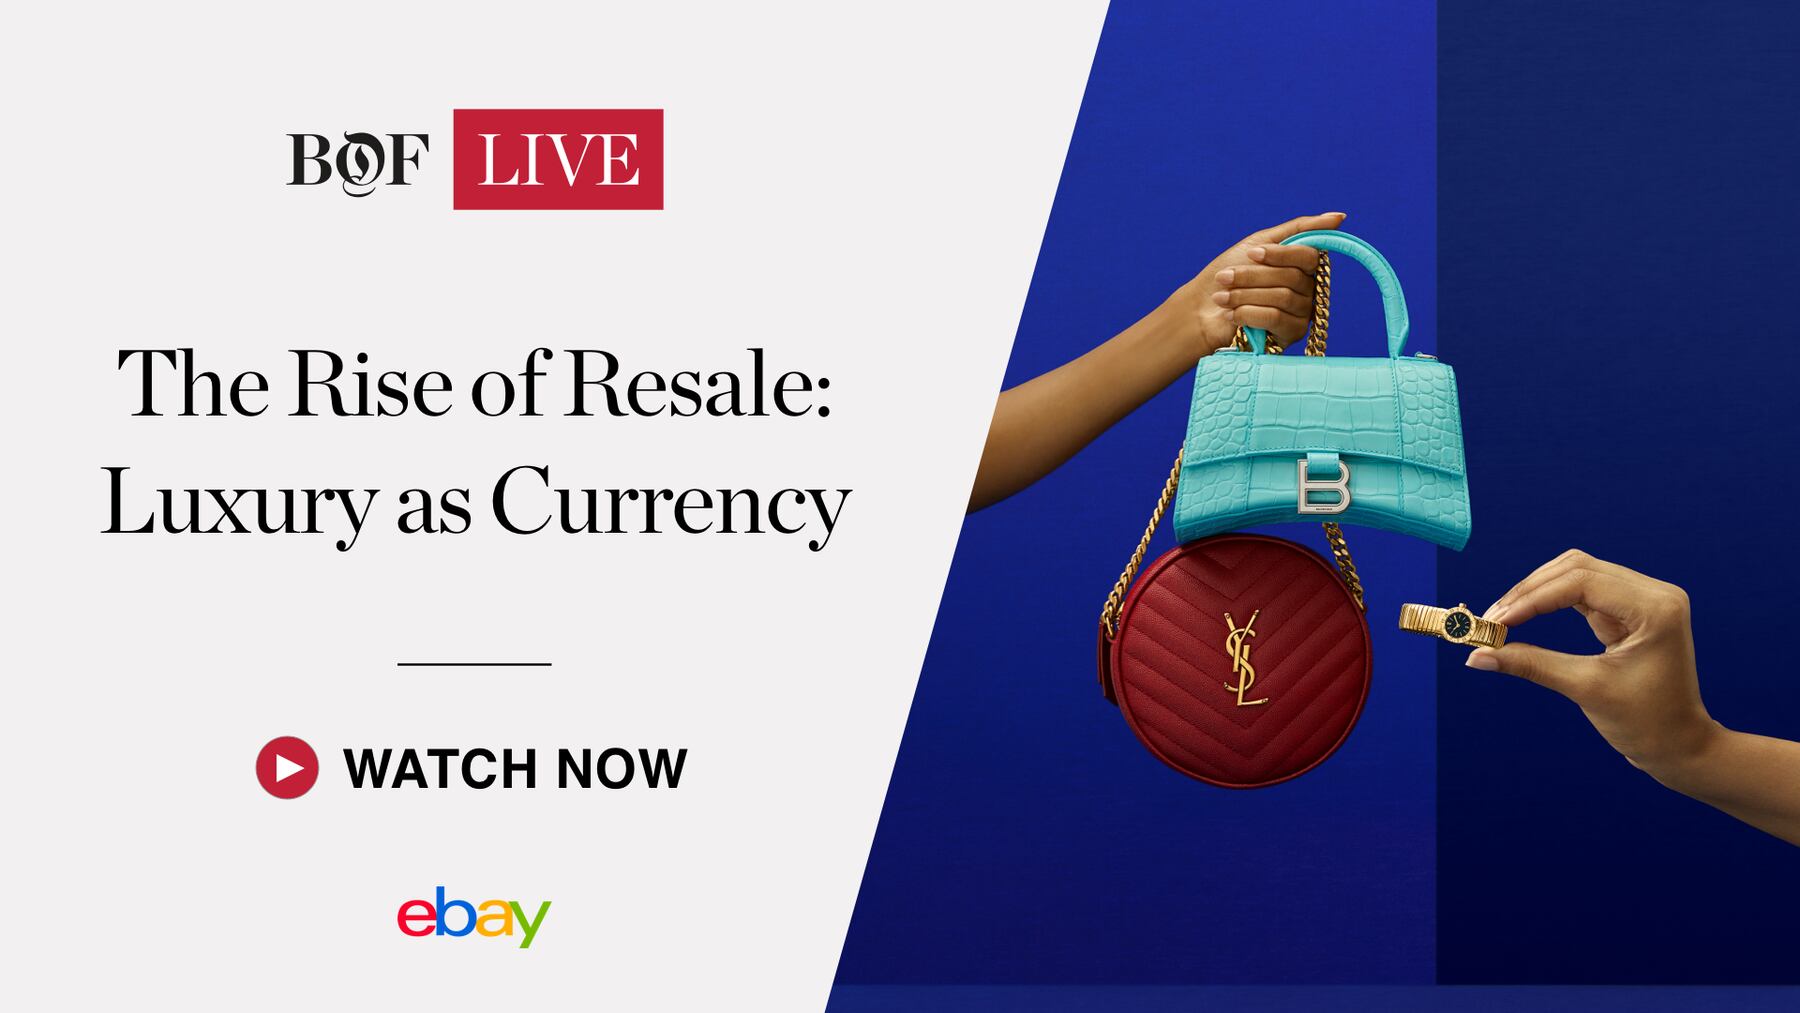 The Rise of Resale: Luxury as Currency